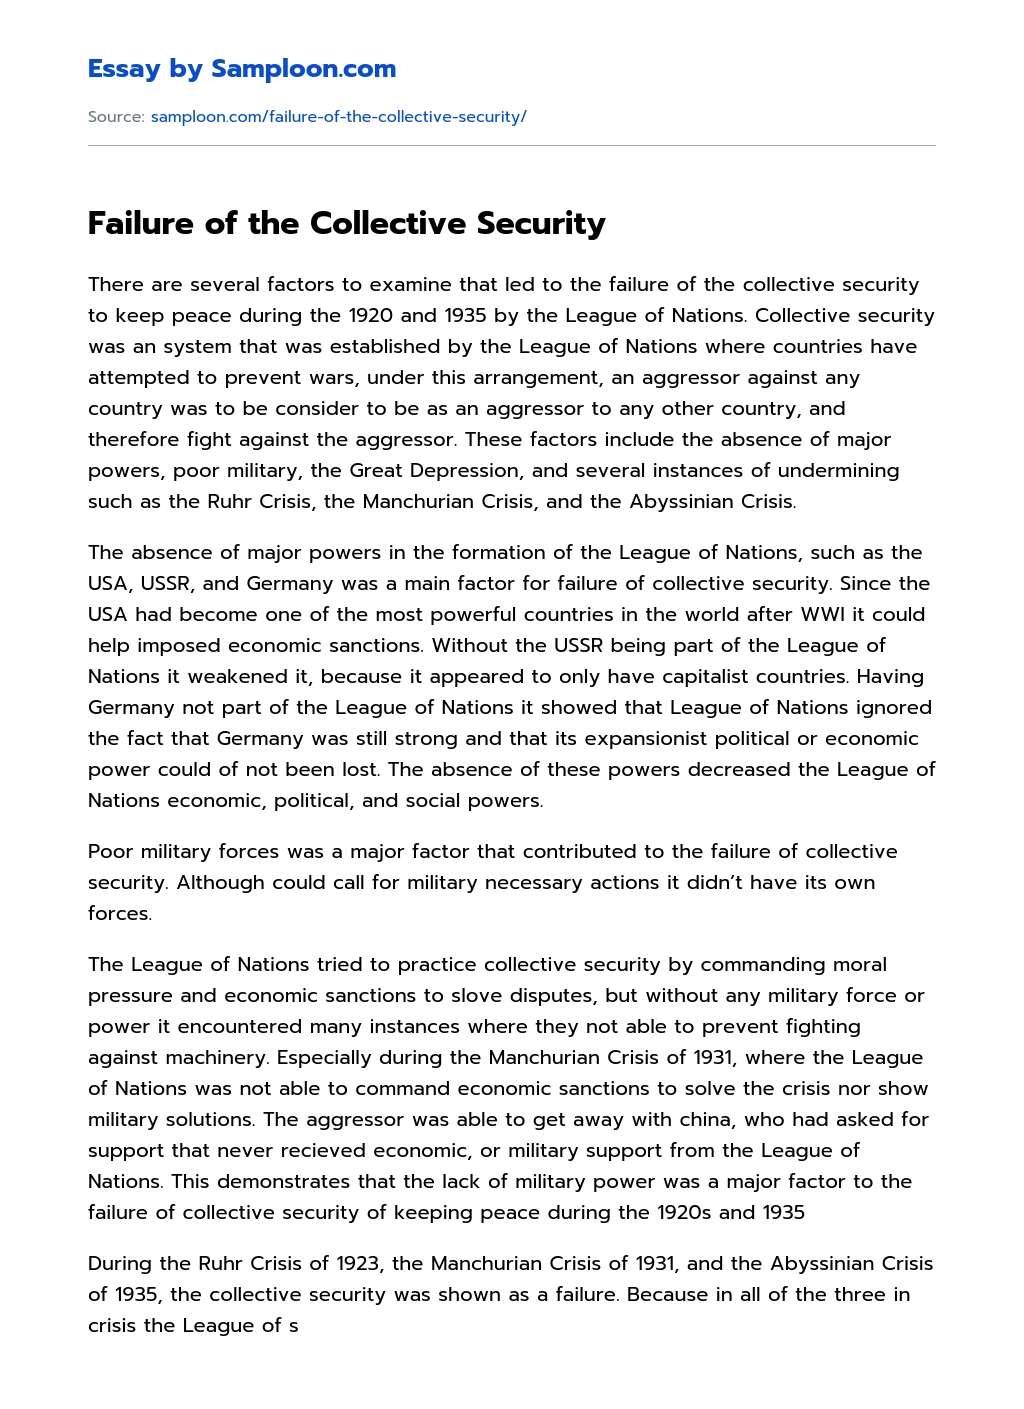 Failure of the Collective Security essay